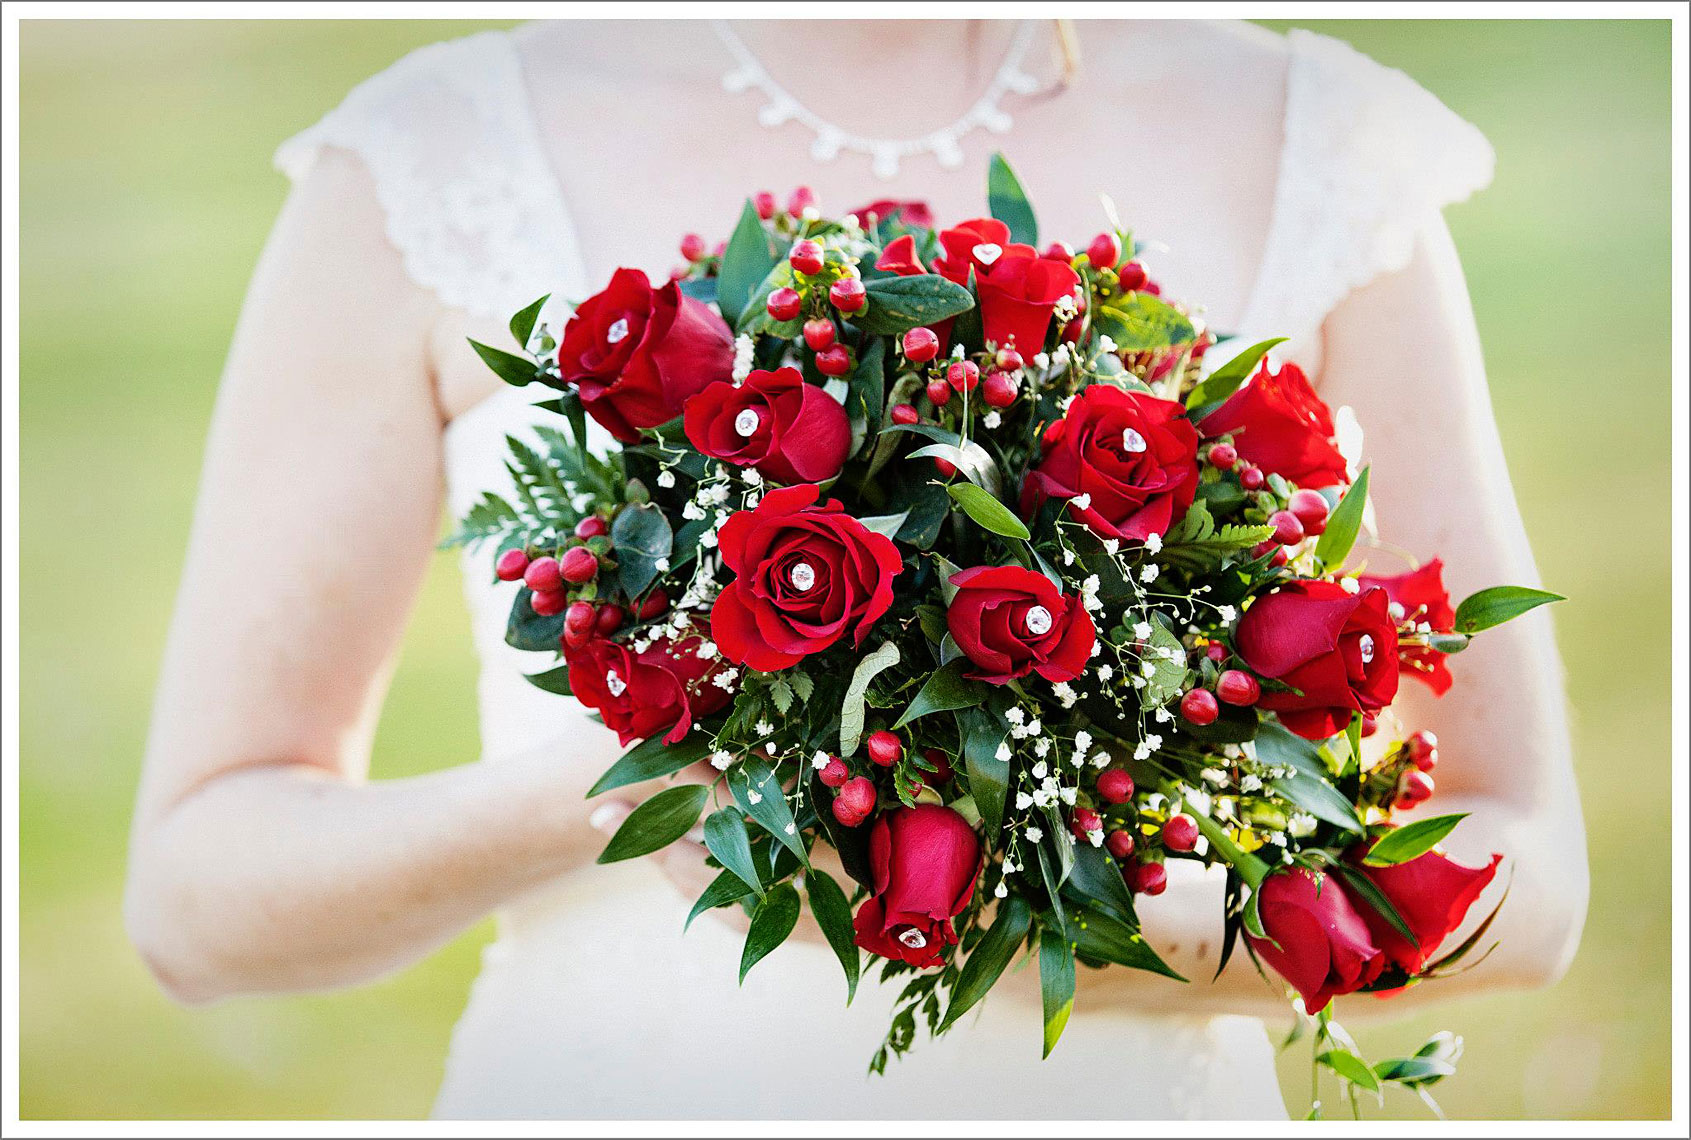 pale skinned bride holding bright red bouquet of flowers